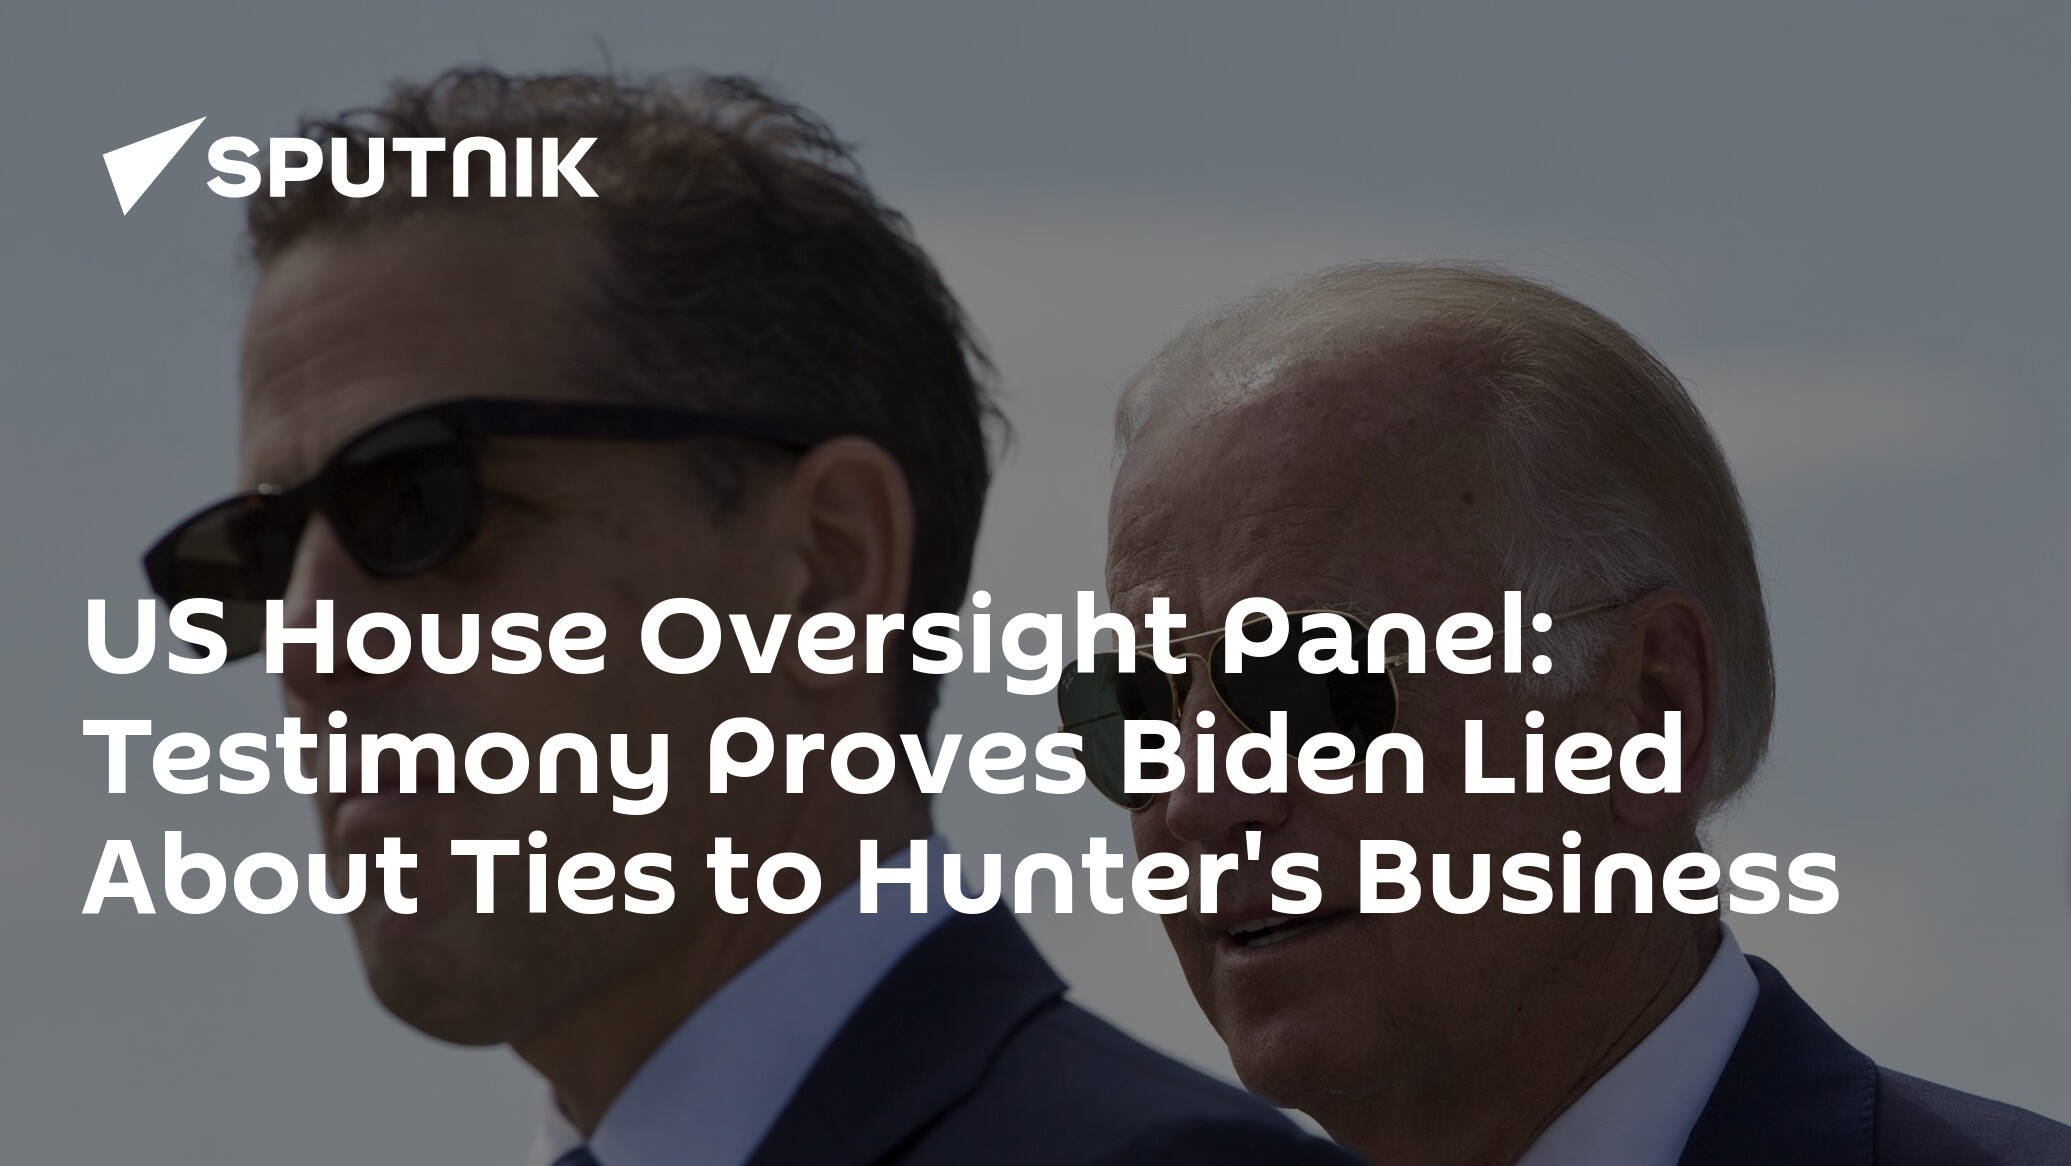 US House Oversight Panel: Testimony Proves Biden Lied About Ties to Hunter's Business